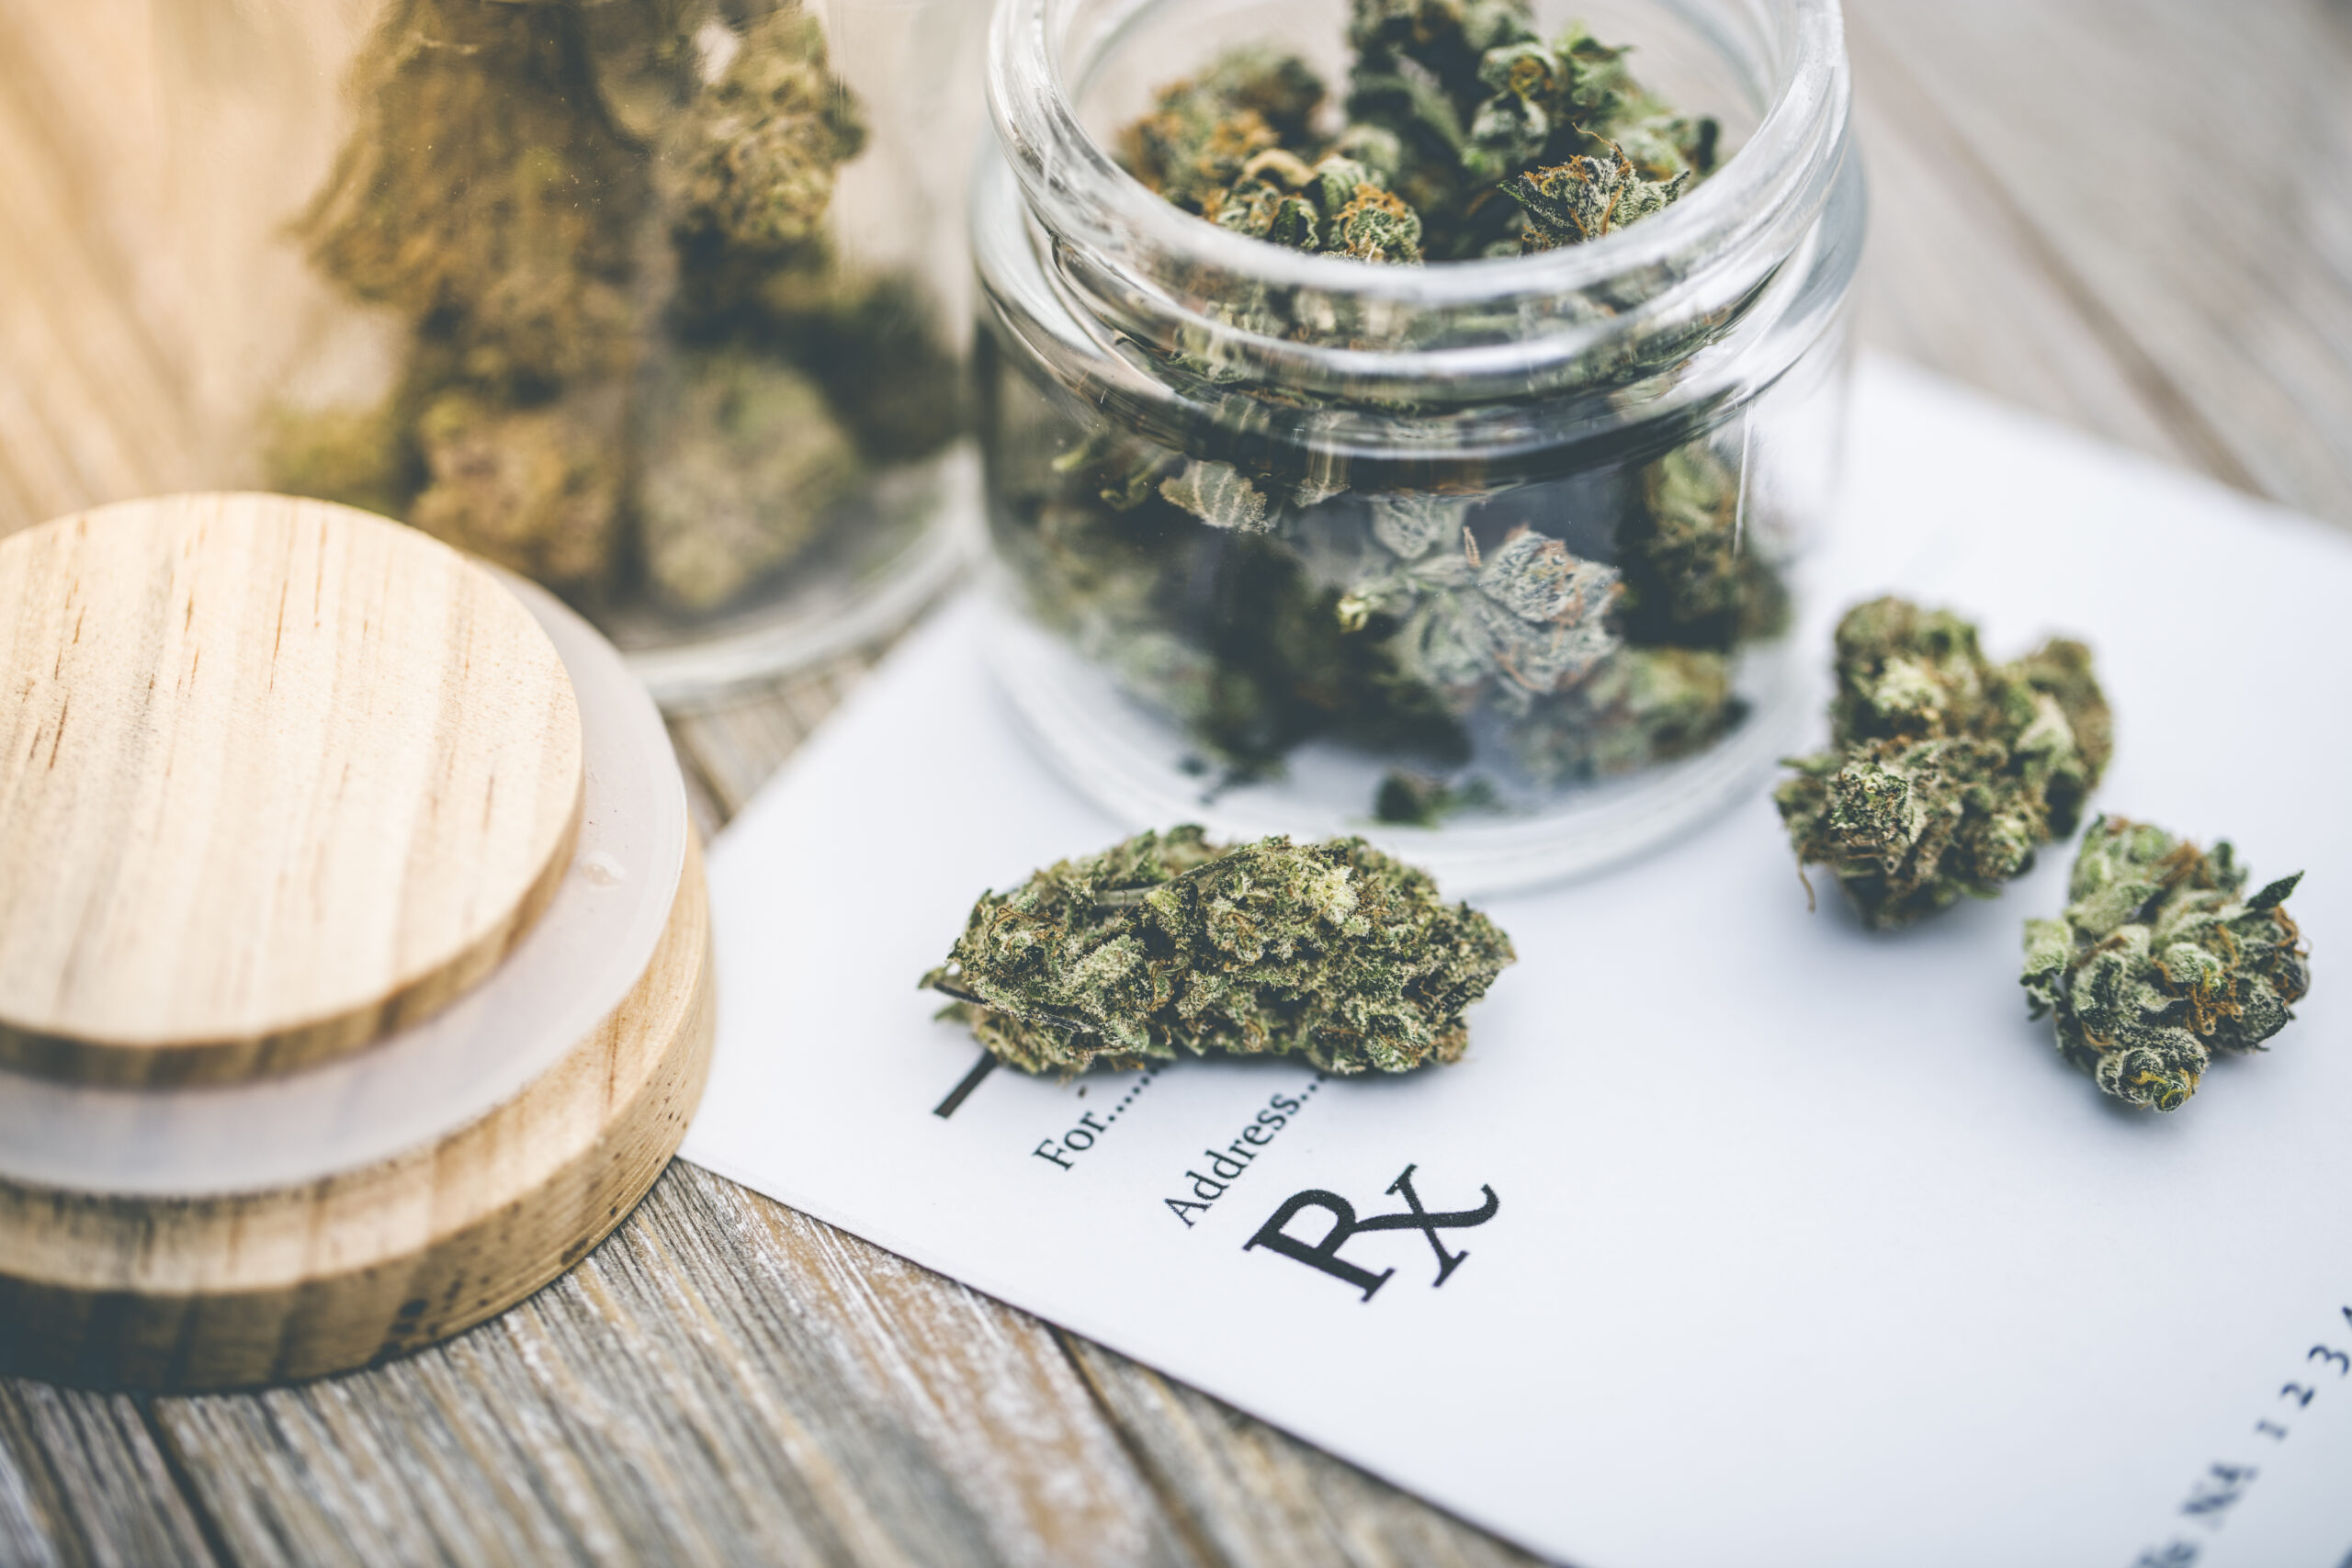 How to Discuss Medical Cannabis with Your Doctor